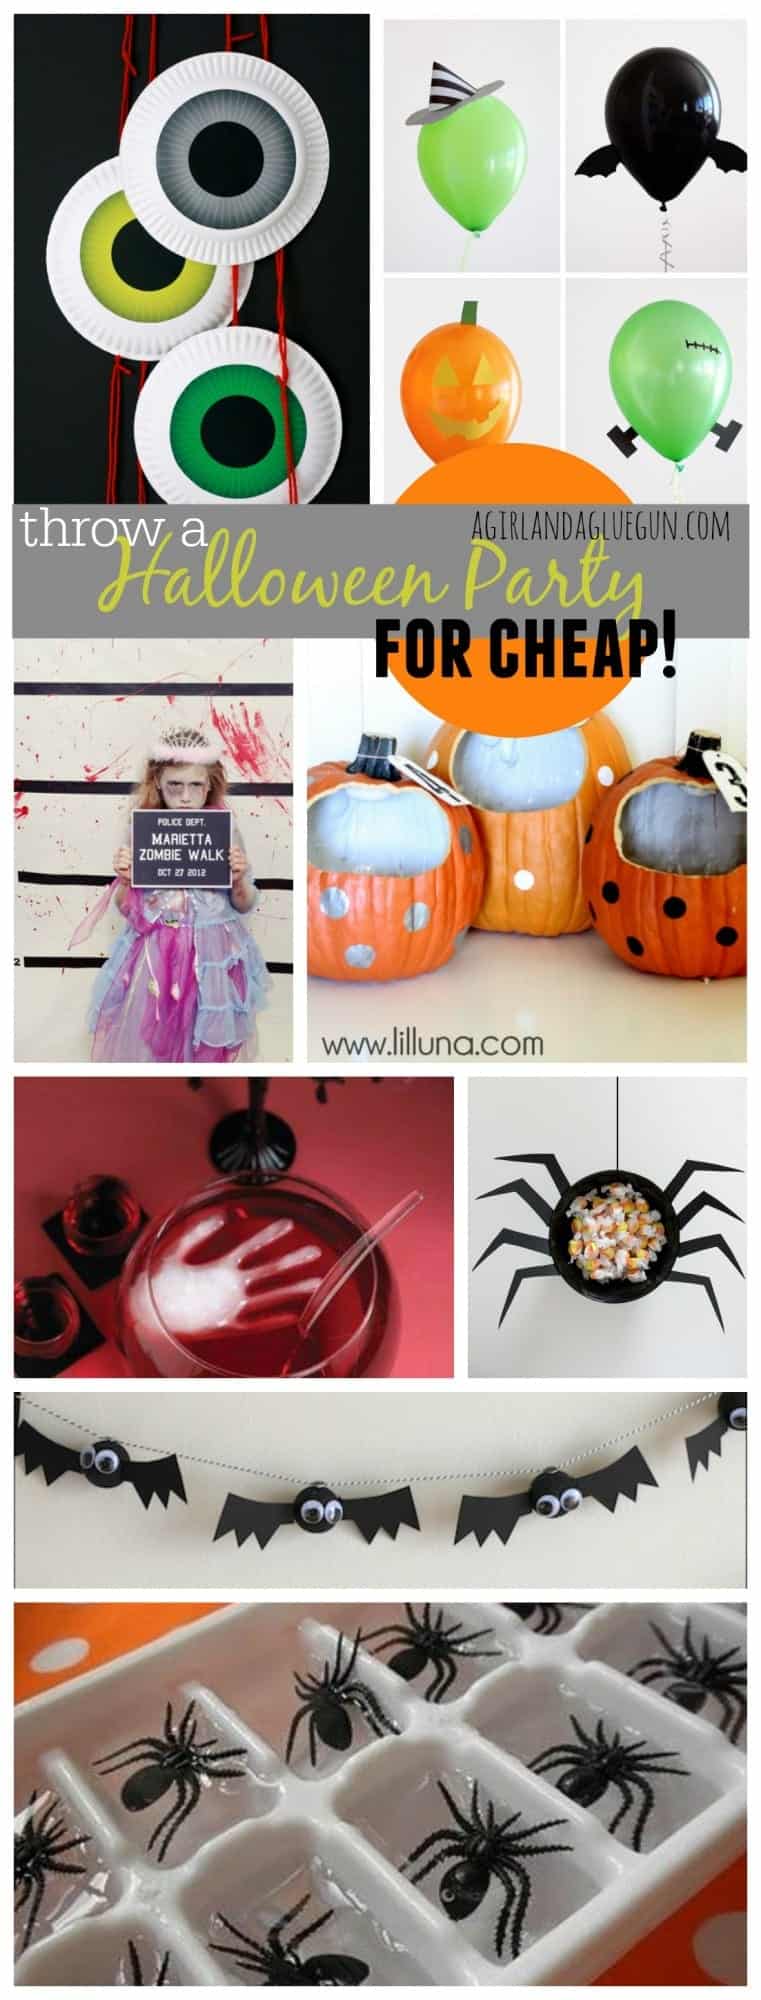 throw a halloween party for cheap! easy and fun ideas that won't break the bank!